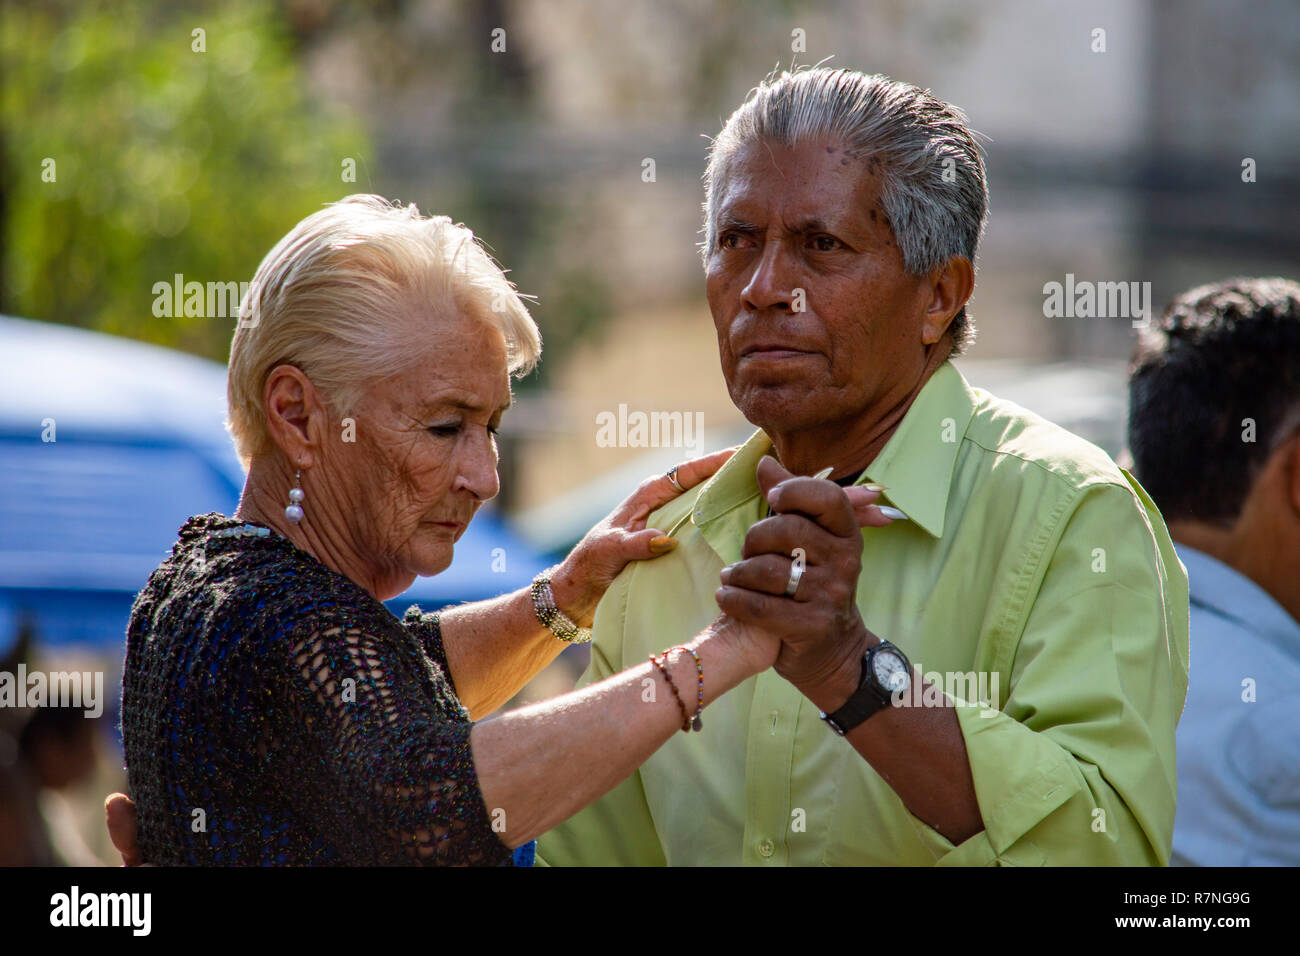 A couple salsa dancing in Alameda Park in Mexico City, Mexico Stock Photo